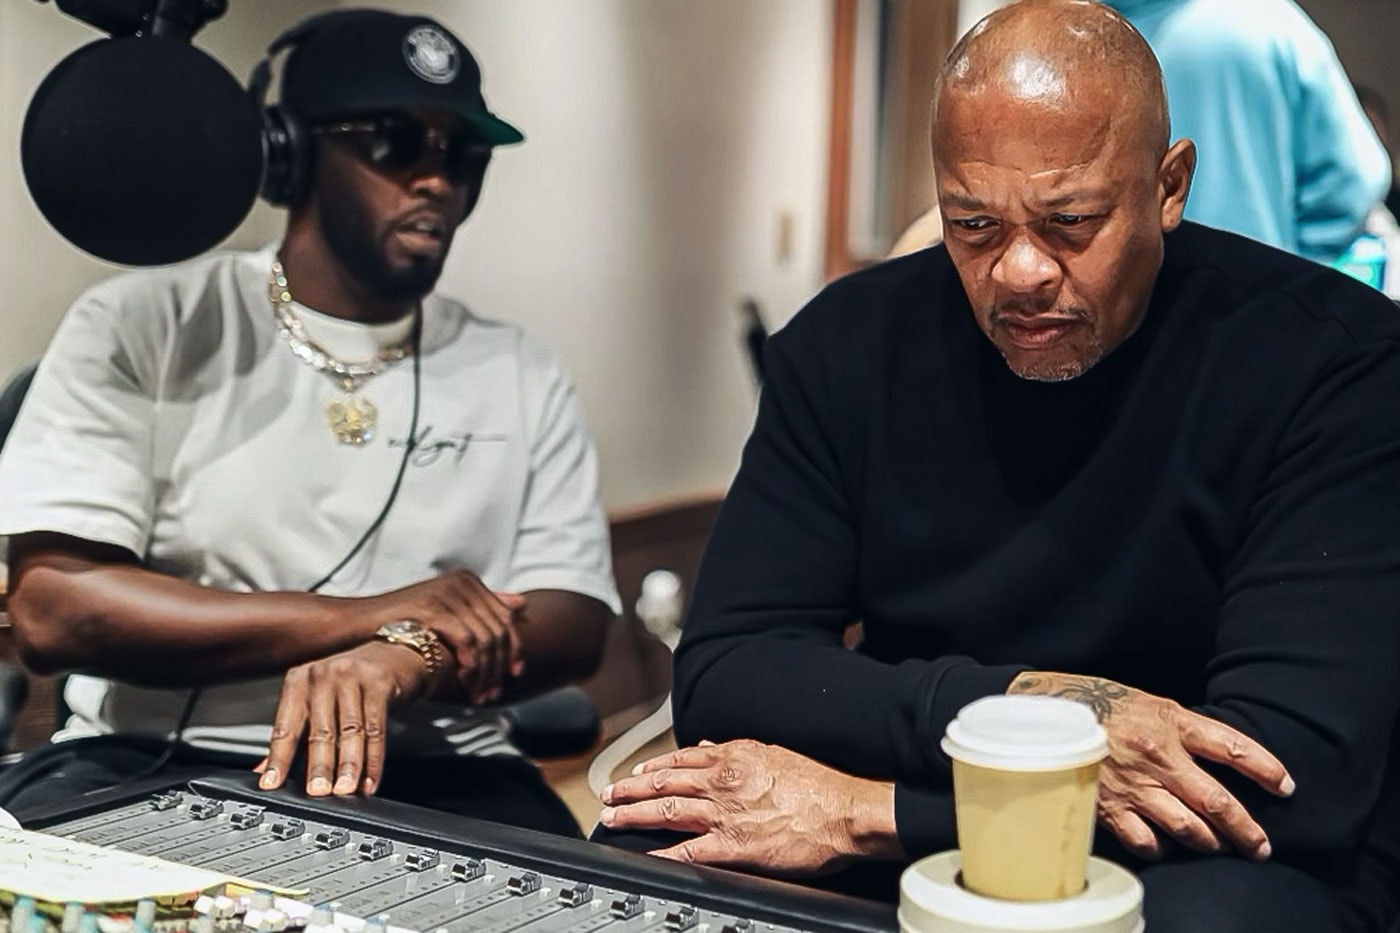 Diddy Dr. Dre in studio Working Together dr Dre New Album